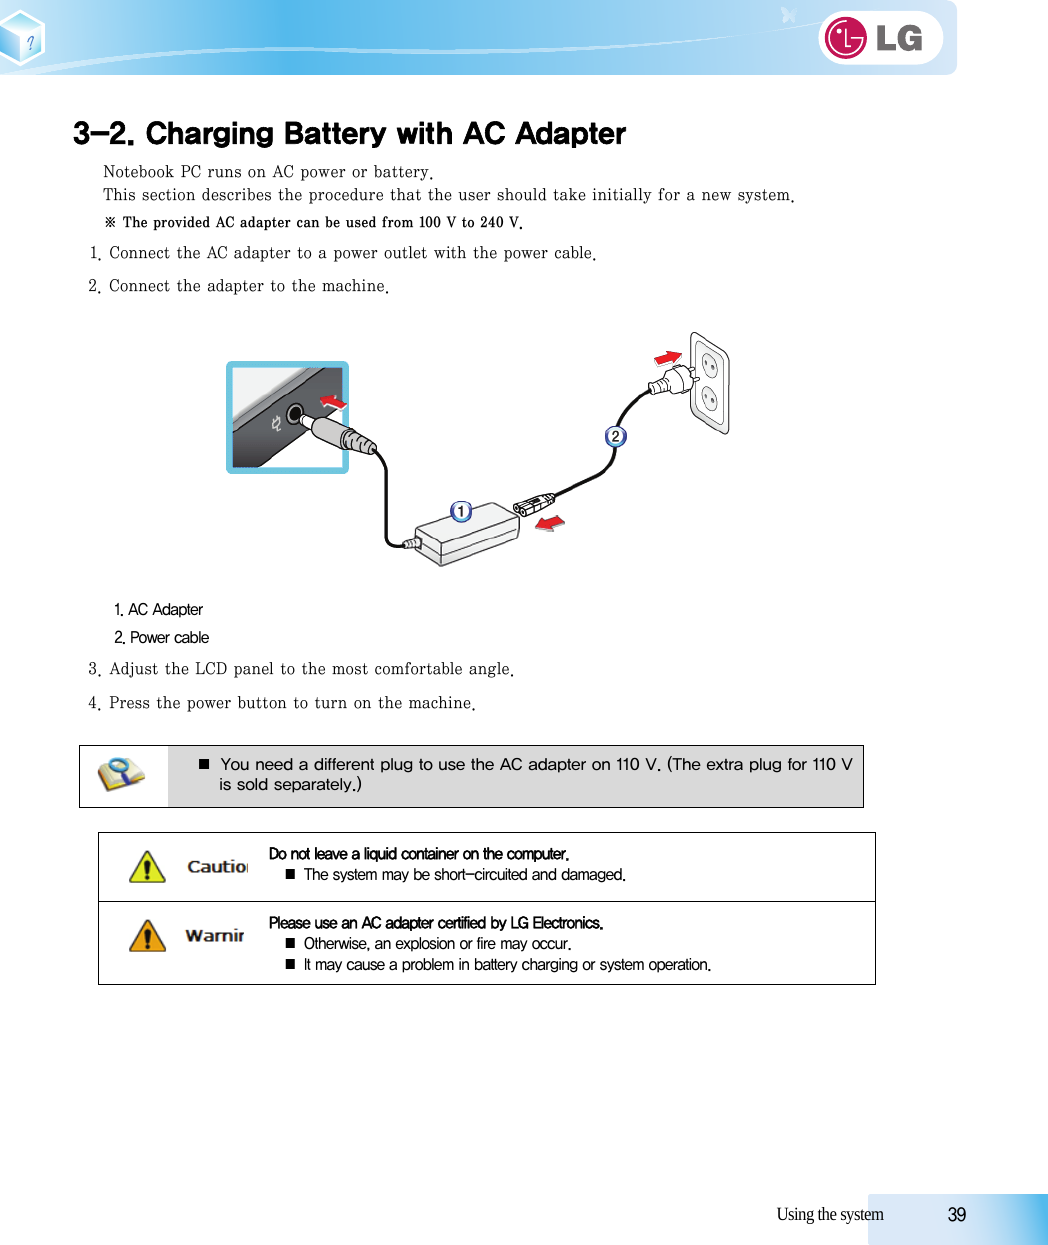 Using the system            393-2. Charging Battery with AC AdapterNotebook PC runs on AC power or battery.This section describes the procedure that the user should take initially for a new system.※ The provided AC adapter can be used from 100 V to 240 V.1. Connect the AC adapter to a power outlet with the power cable.2. Connect the adapter to the machine.1. AC Adapter2. Power cable3. Adjust the LCD panel to the most comfortable angle.4. Press the power button to turn on the machine.■ You need a different plug to use the AC adapter on 110 V. (The extra plug for 110 Vis sold separately.)Do not leave a liquid container on the computer.■ The system may be short-circuited and damaged.Please use an AC adapter certified by LG Electronics.■ Otherwise, an explosion or fire may occur.■ It may cause a problem in battery charging or system operation.